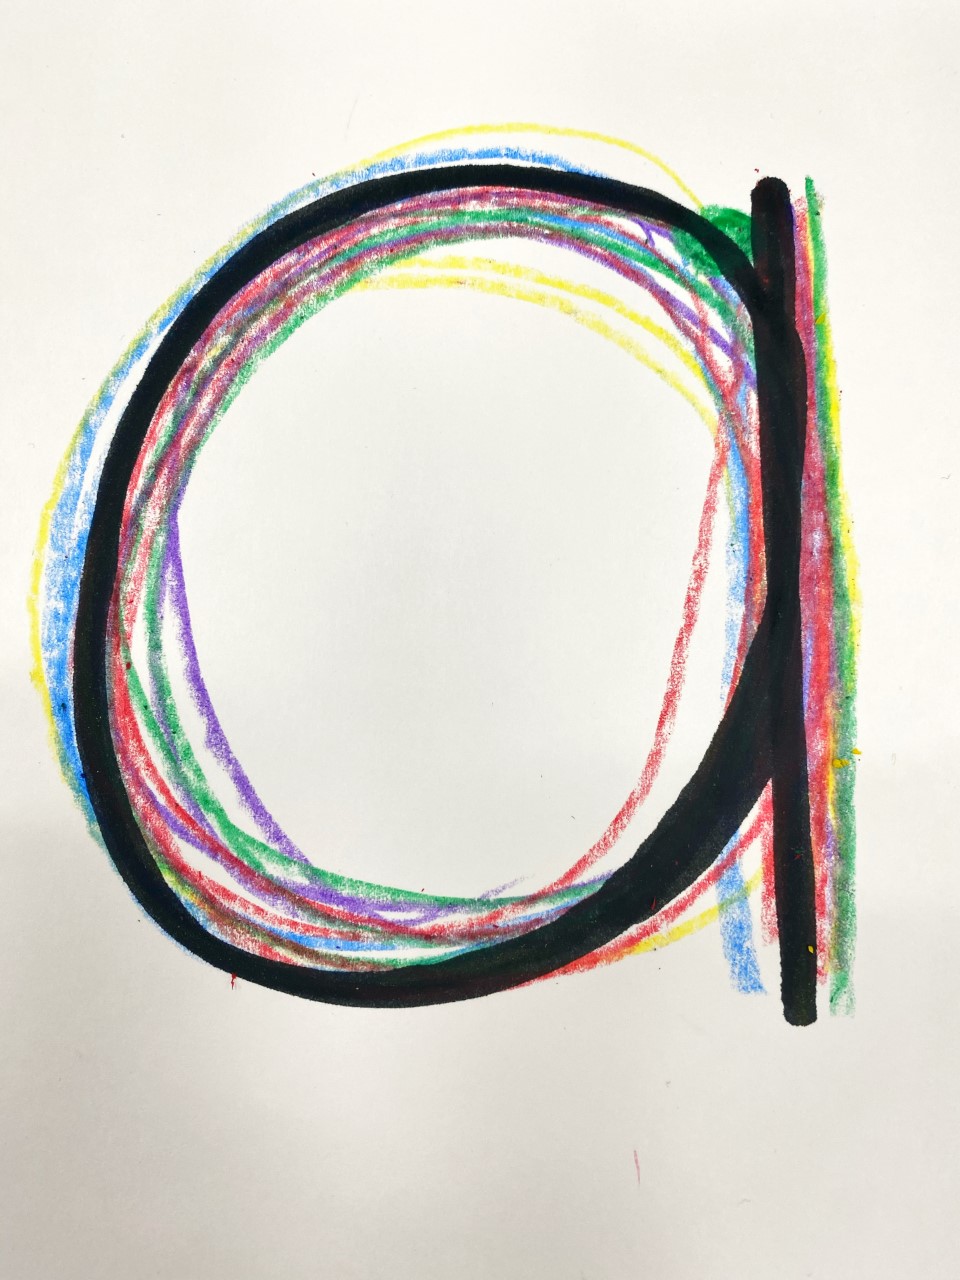 Lower case letter traced repeatedly in crayon